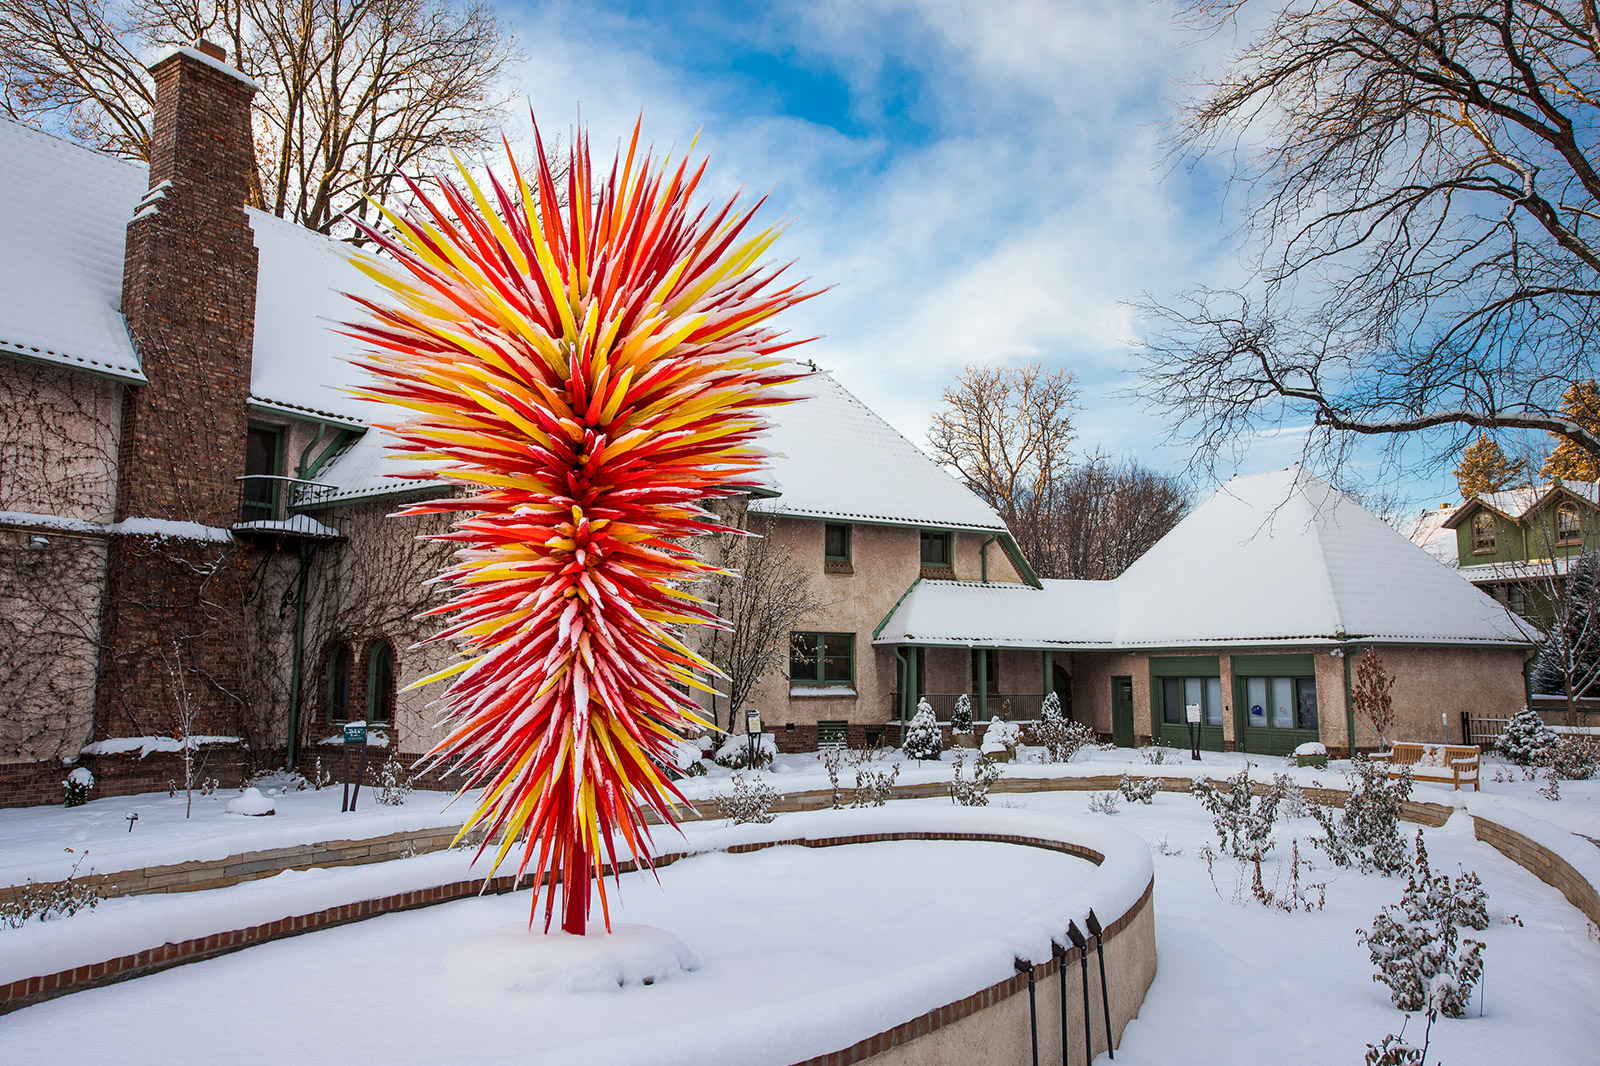 Icicle Tower, 2014, Dale Chihuly